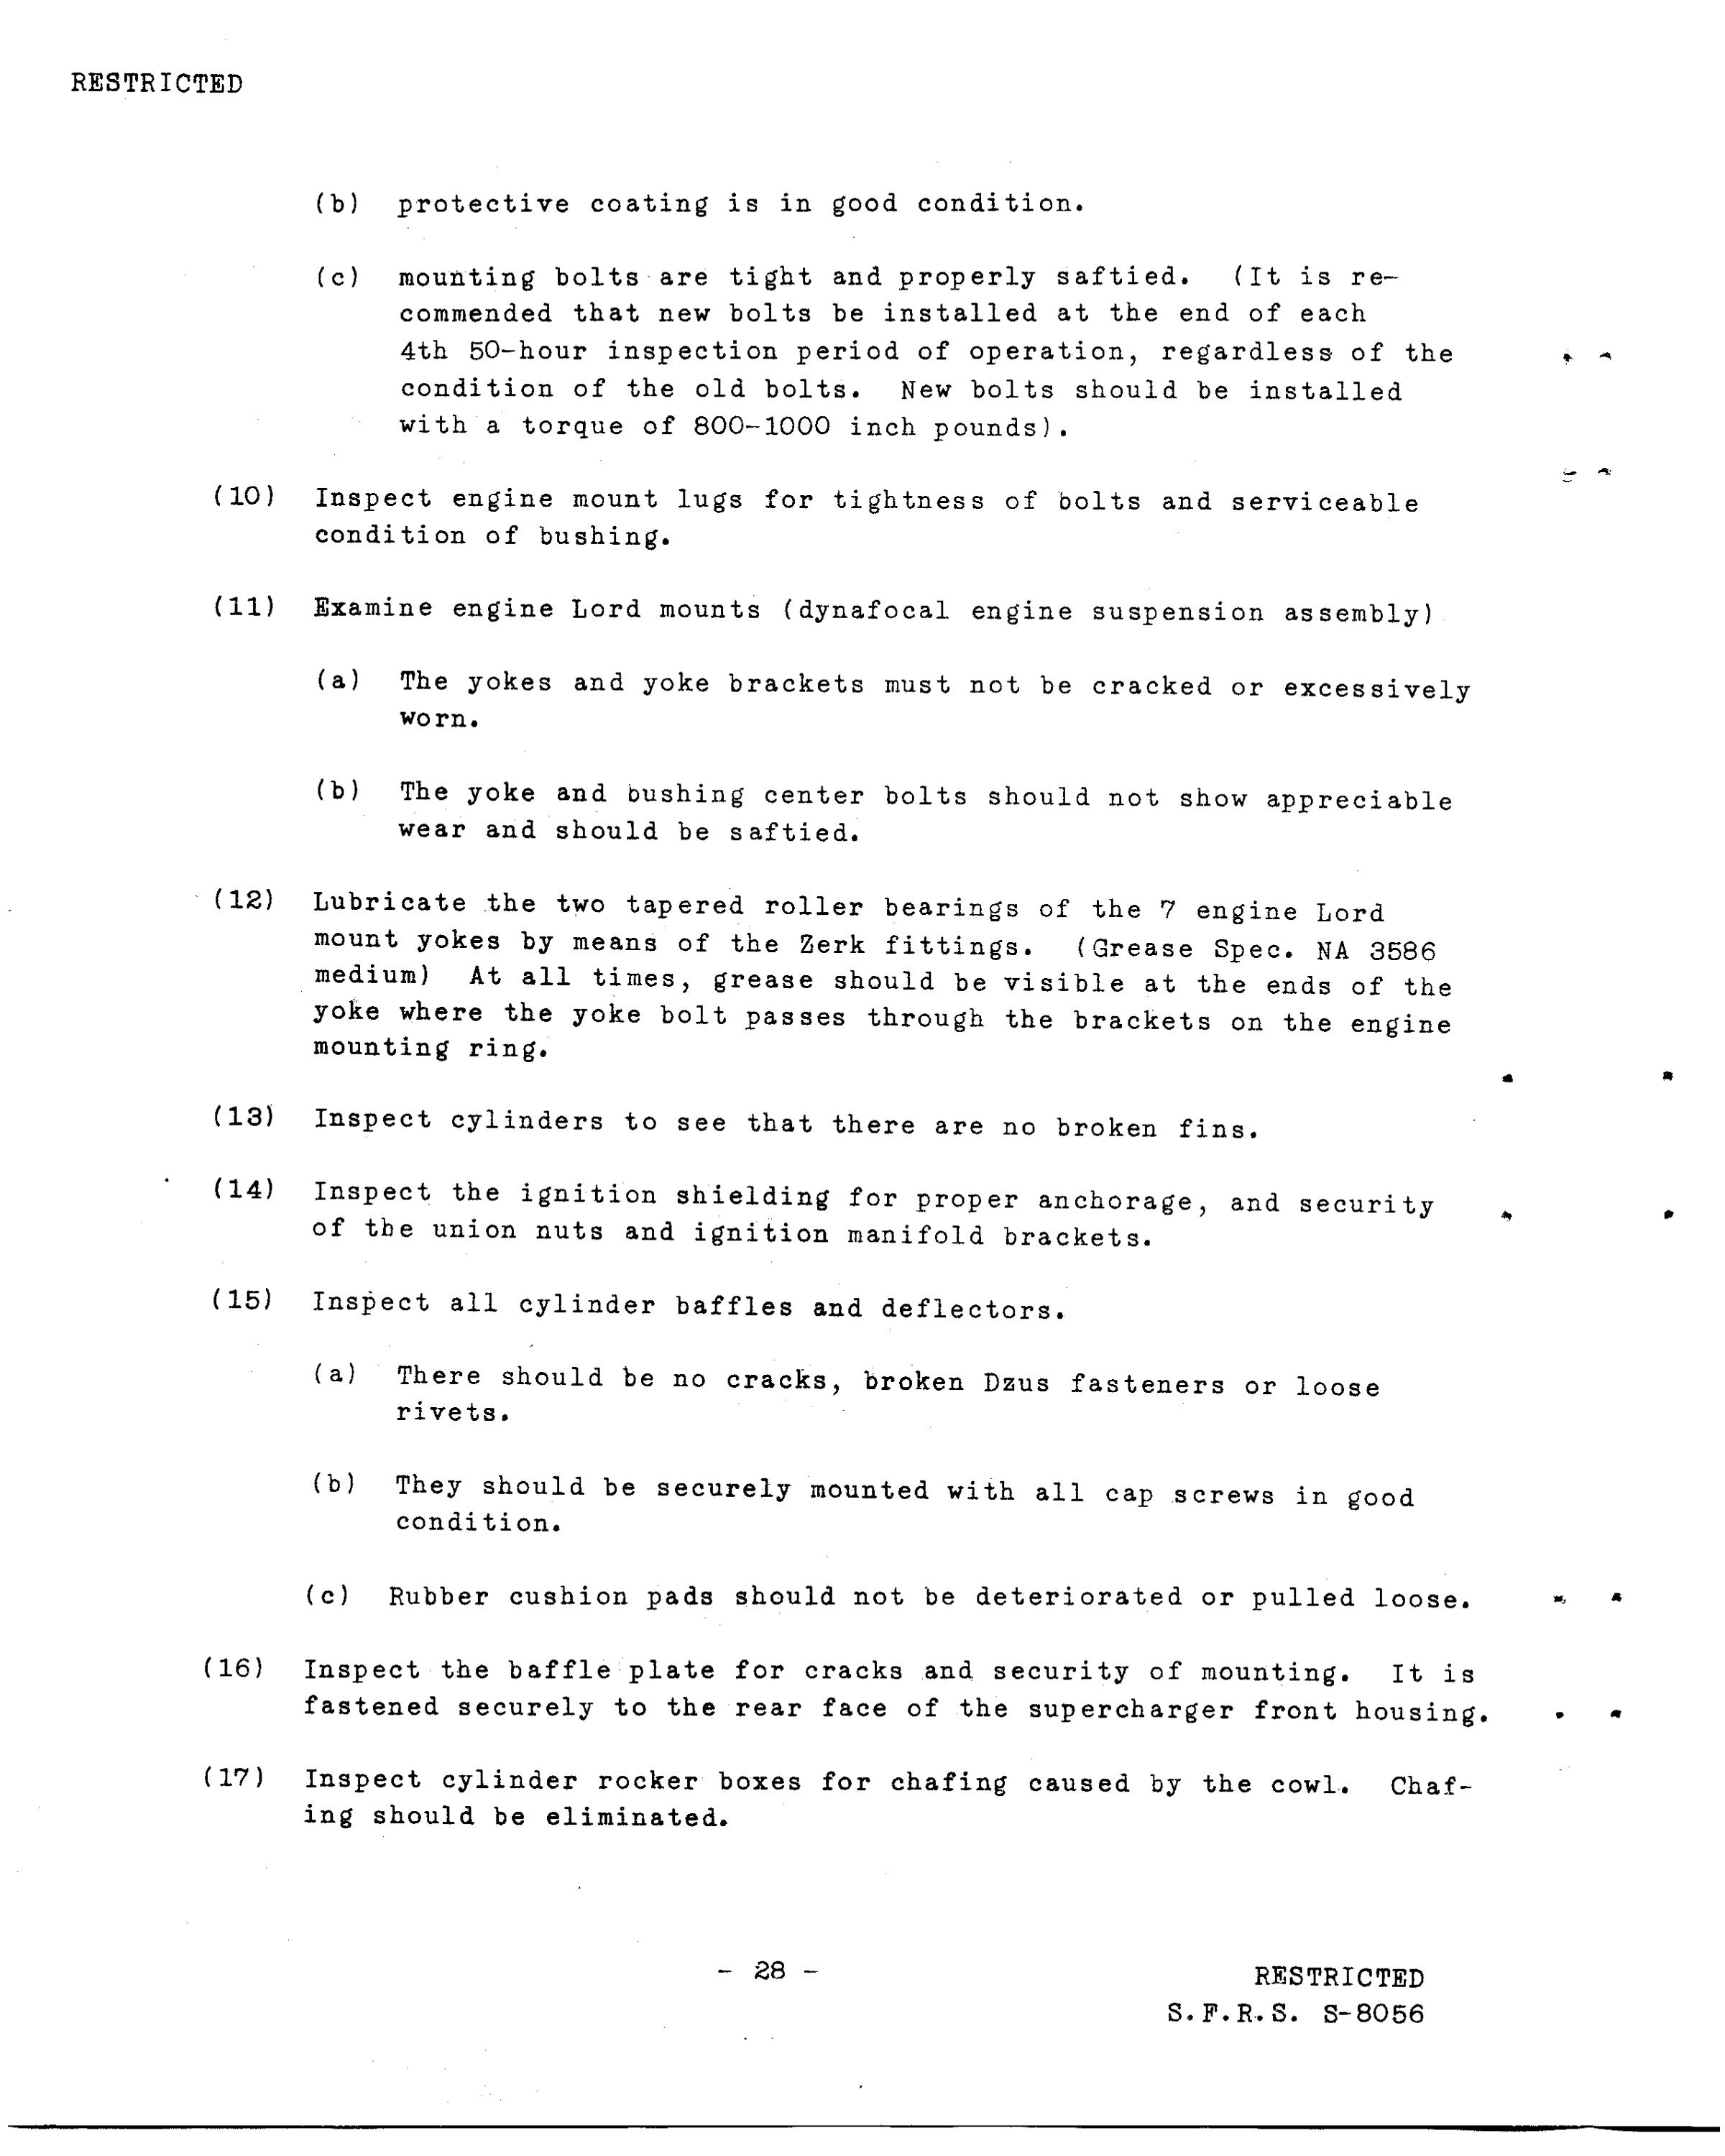 Sample page 29 from AirCorps Library document: 50 HR Inspection & Maintenance B-25 - SFRS S-8056